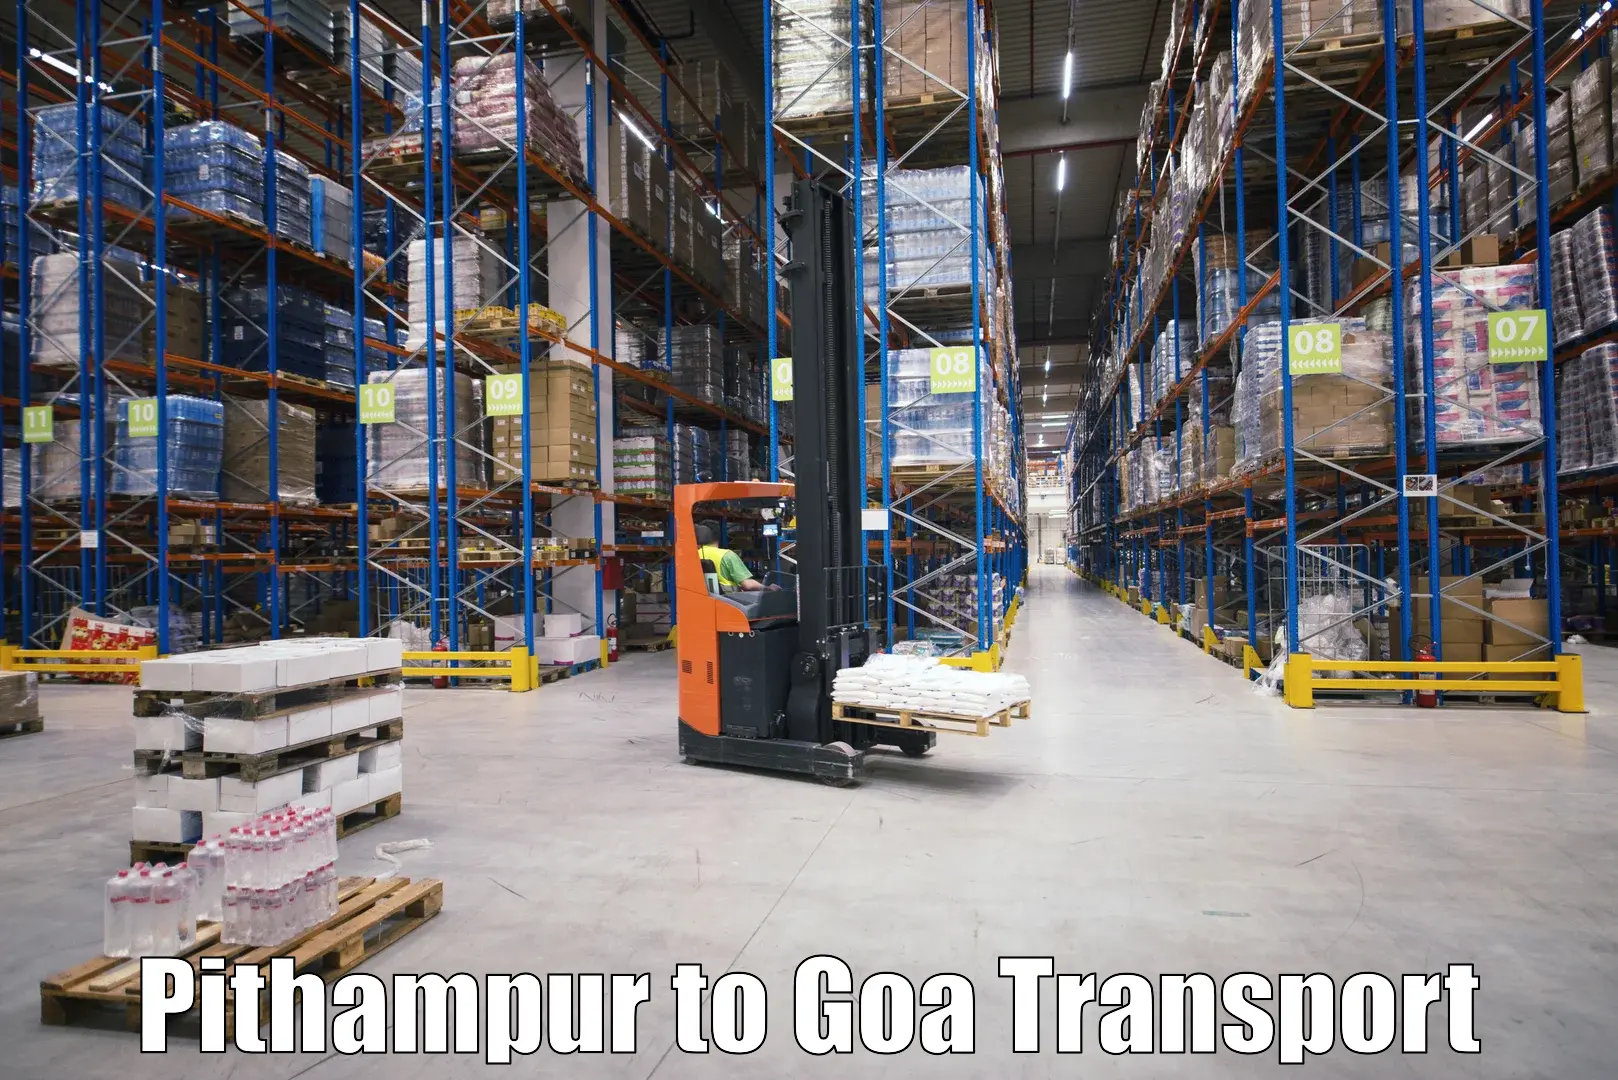 Daily parcel service transport Pithampur to Bardez